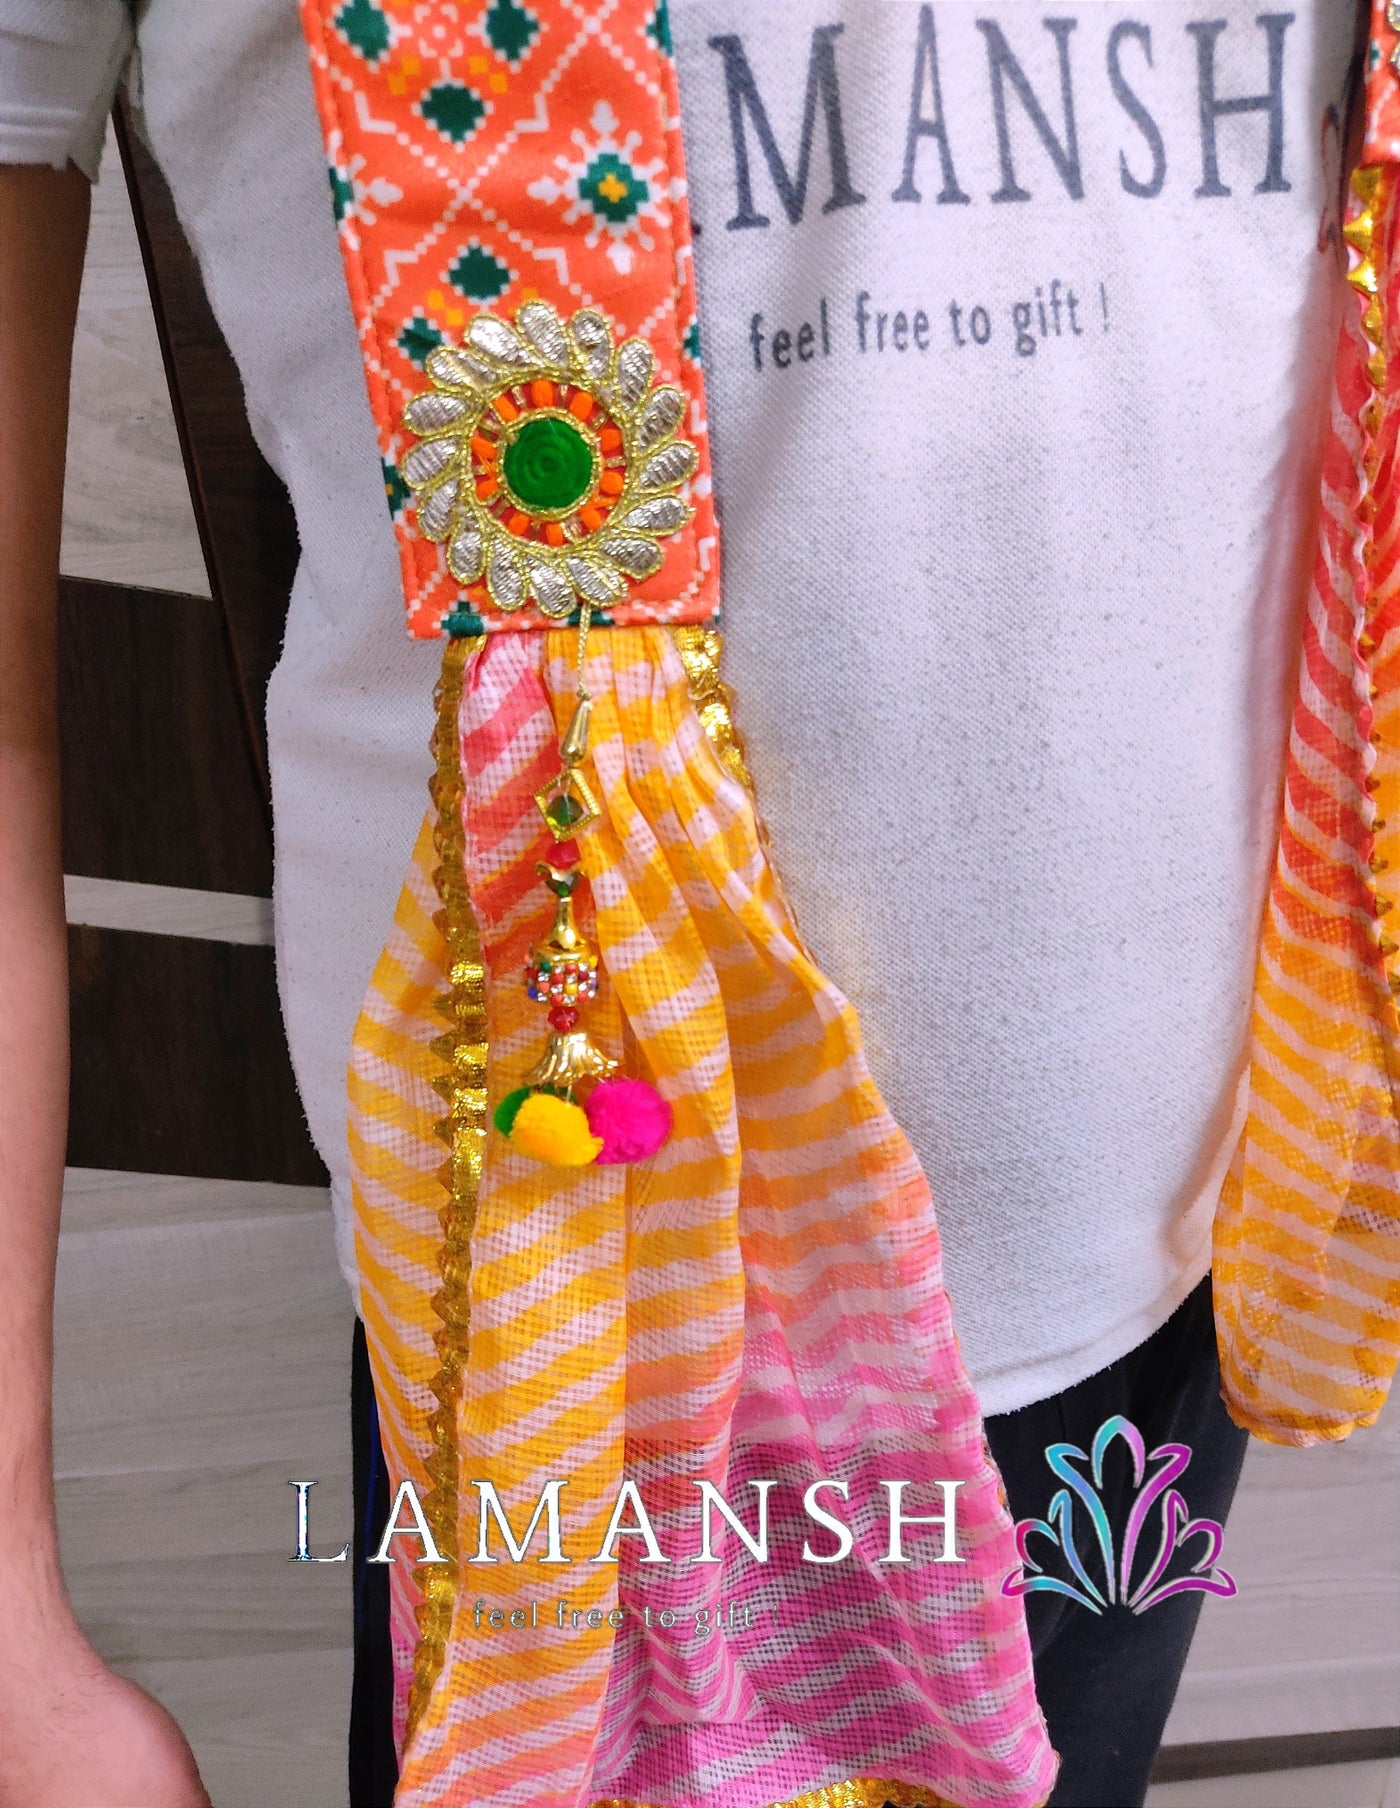 Lamansh guests welcome stoles Assorted Colours / Fabric / 20 LAMANSH® 20 pc Barati Guests Swagat Stoles / Dupatta / Fabric Mala's For Wedding ceremony / Stoles for greeting guests / Best for Hotels & Resorts too